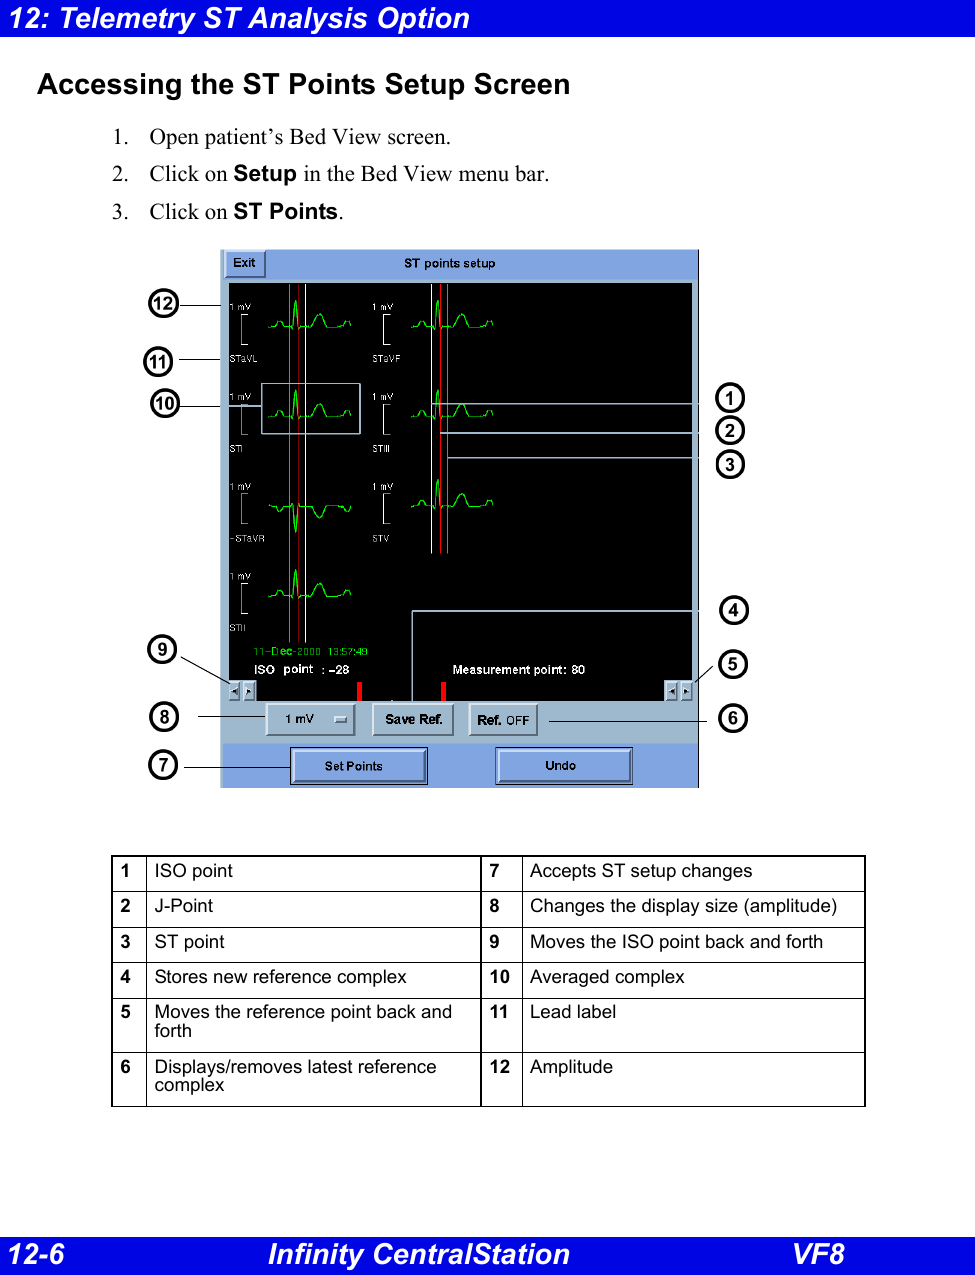 12-6 Infinity CentralStation VF812: Telemetry ST Analysis OptionAccessing the ST Points Setup Screen1. Open patient’s Bed View screen.2. Click on Setup in the Bed View menu bar.3. Click on ST Points.1ISO point 7Accepts ST setup changes2J-Point 8Changes the display size (amplitude)3ST point 9Moves the ISO point back and forth4Stores new reference complex 10 Averaged complex5Moves the reference point back and forth11 Lead label6Displays/removes latest reference complex12 Amplitude